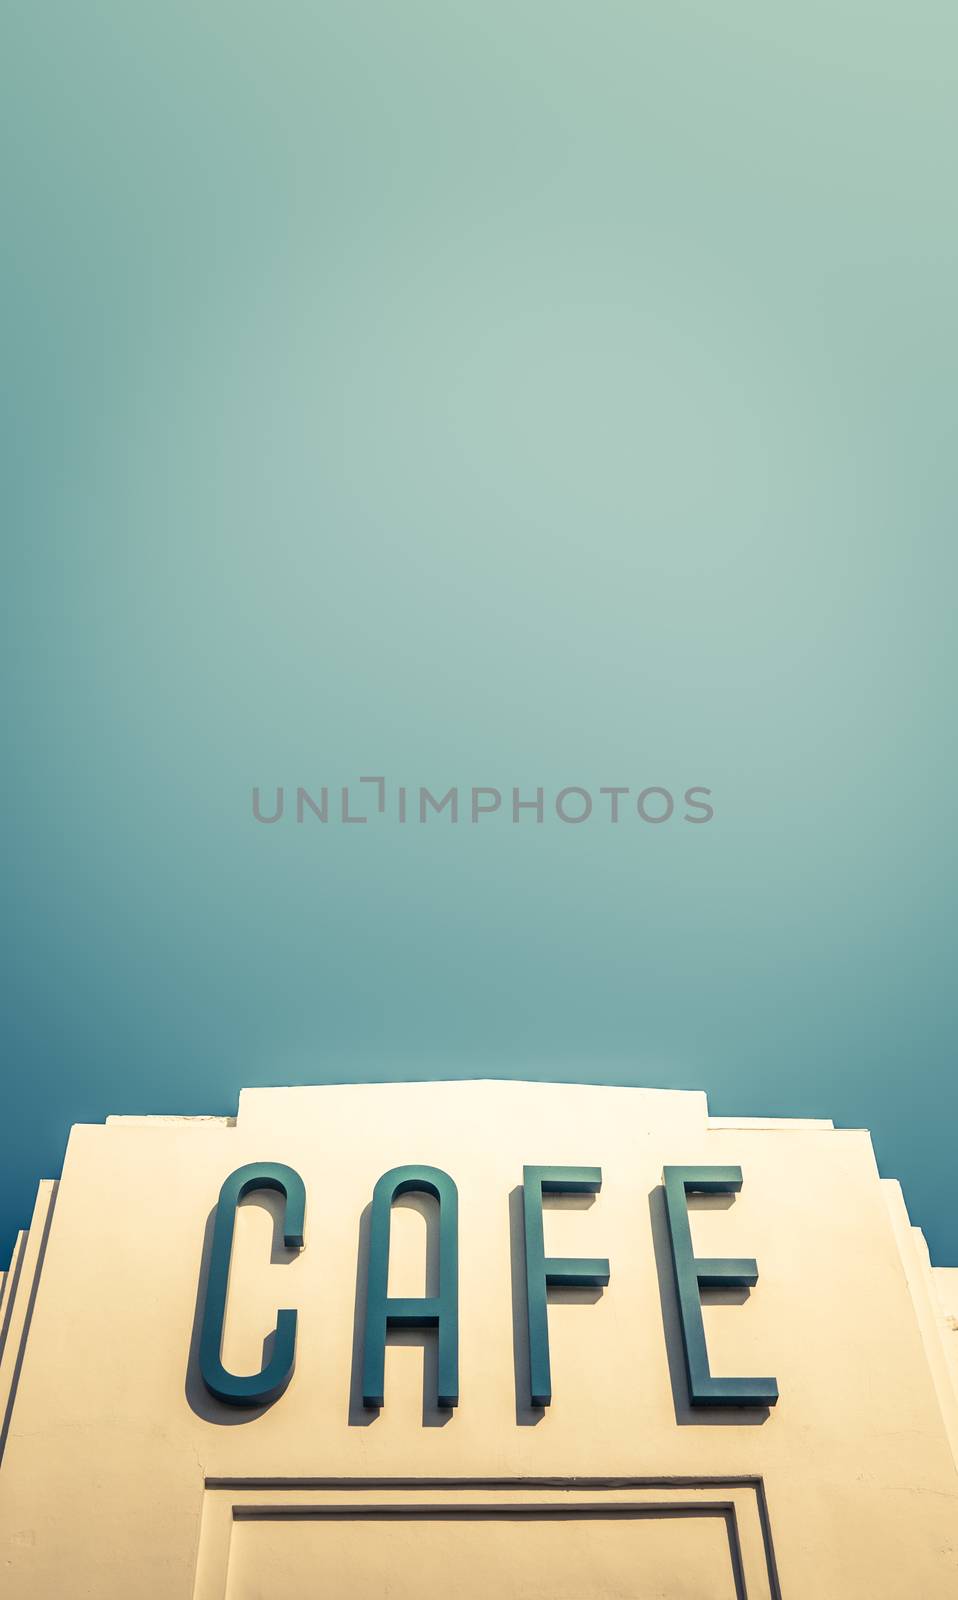 A Retro Art Deco Sign For A Cafe Or Restaurant Against A Blur Sky With Copy Space